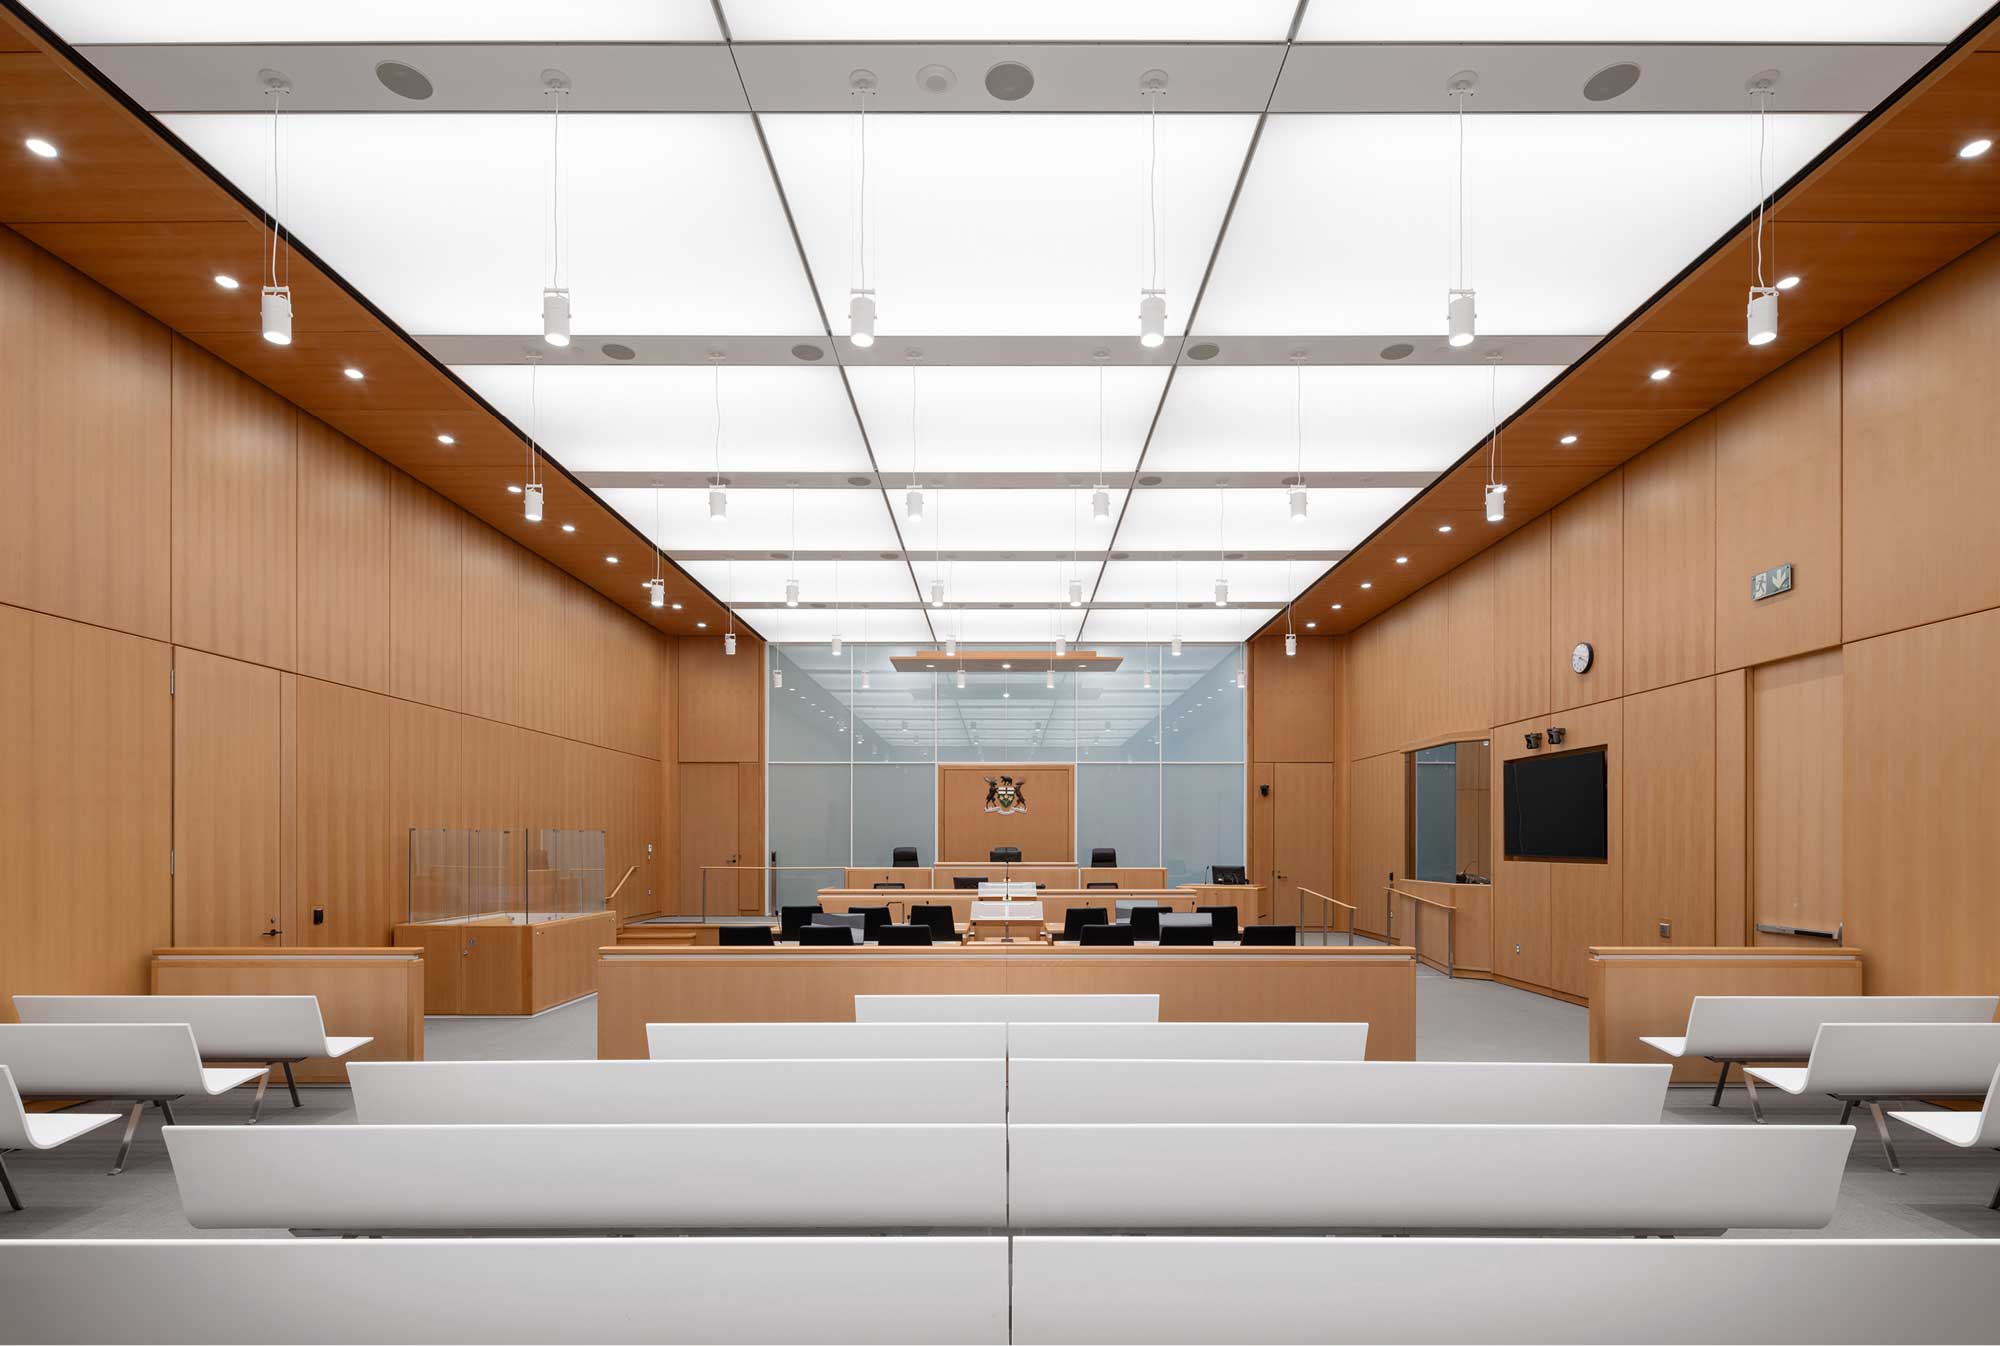 Ceremonial Courtroom with white solid surface custom public seating, beech paneling and millwork, luminous ceiling and translucent Dias wall allowing exterior daylight penetration